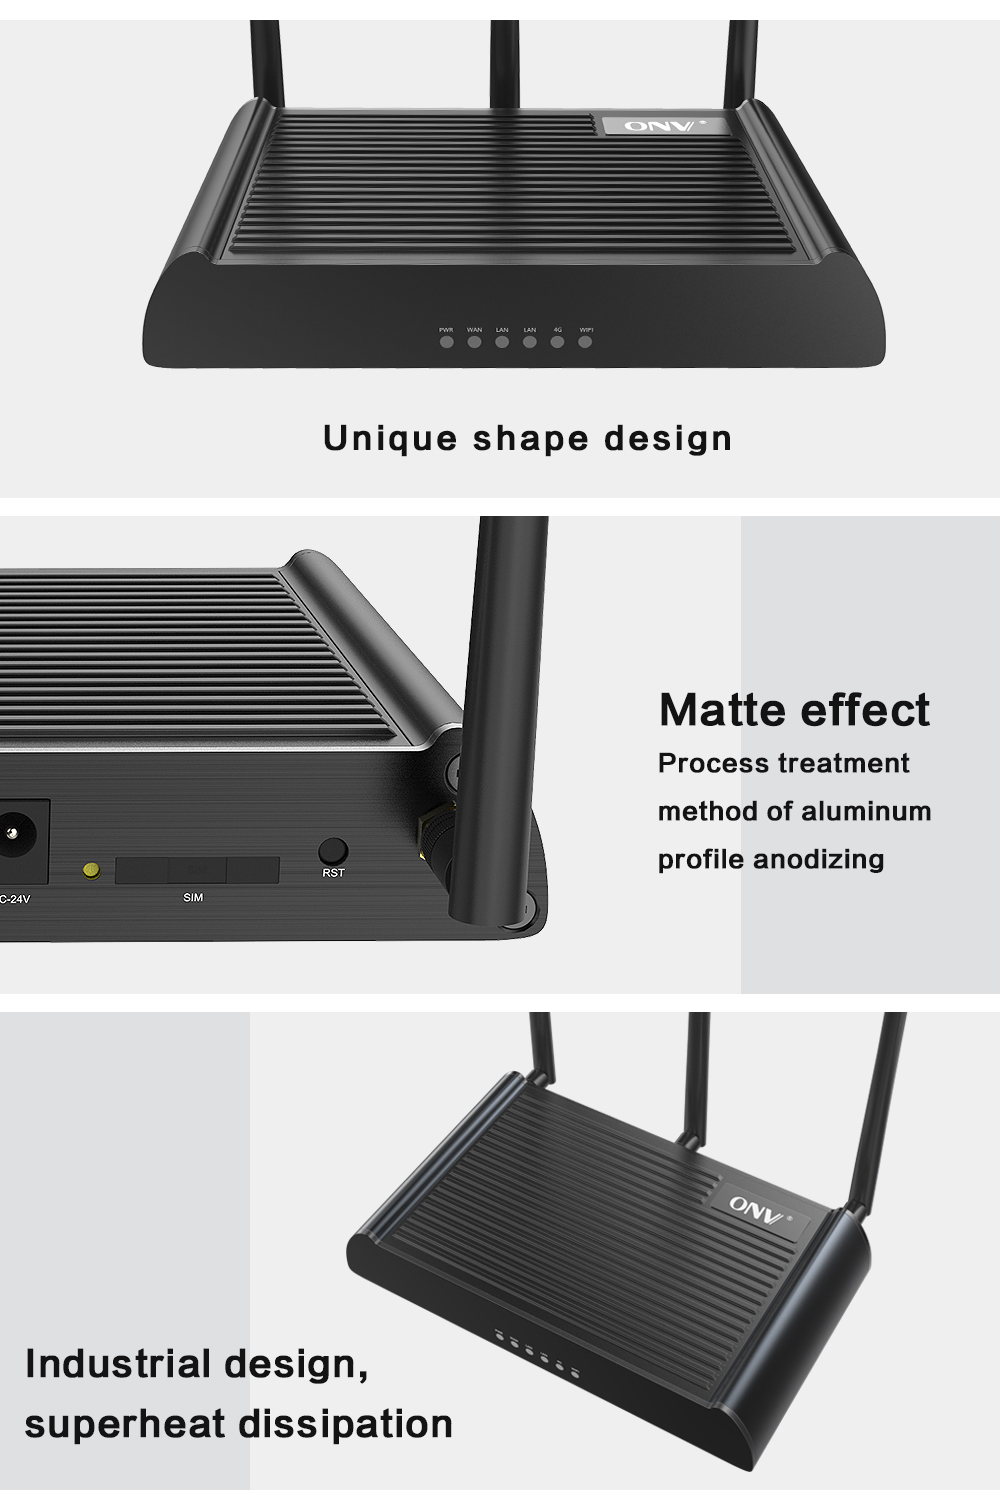 4G industrial wireless router，4G router，industrial router，4G WiFi router